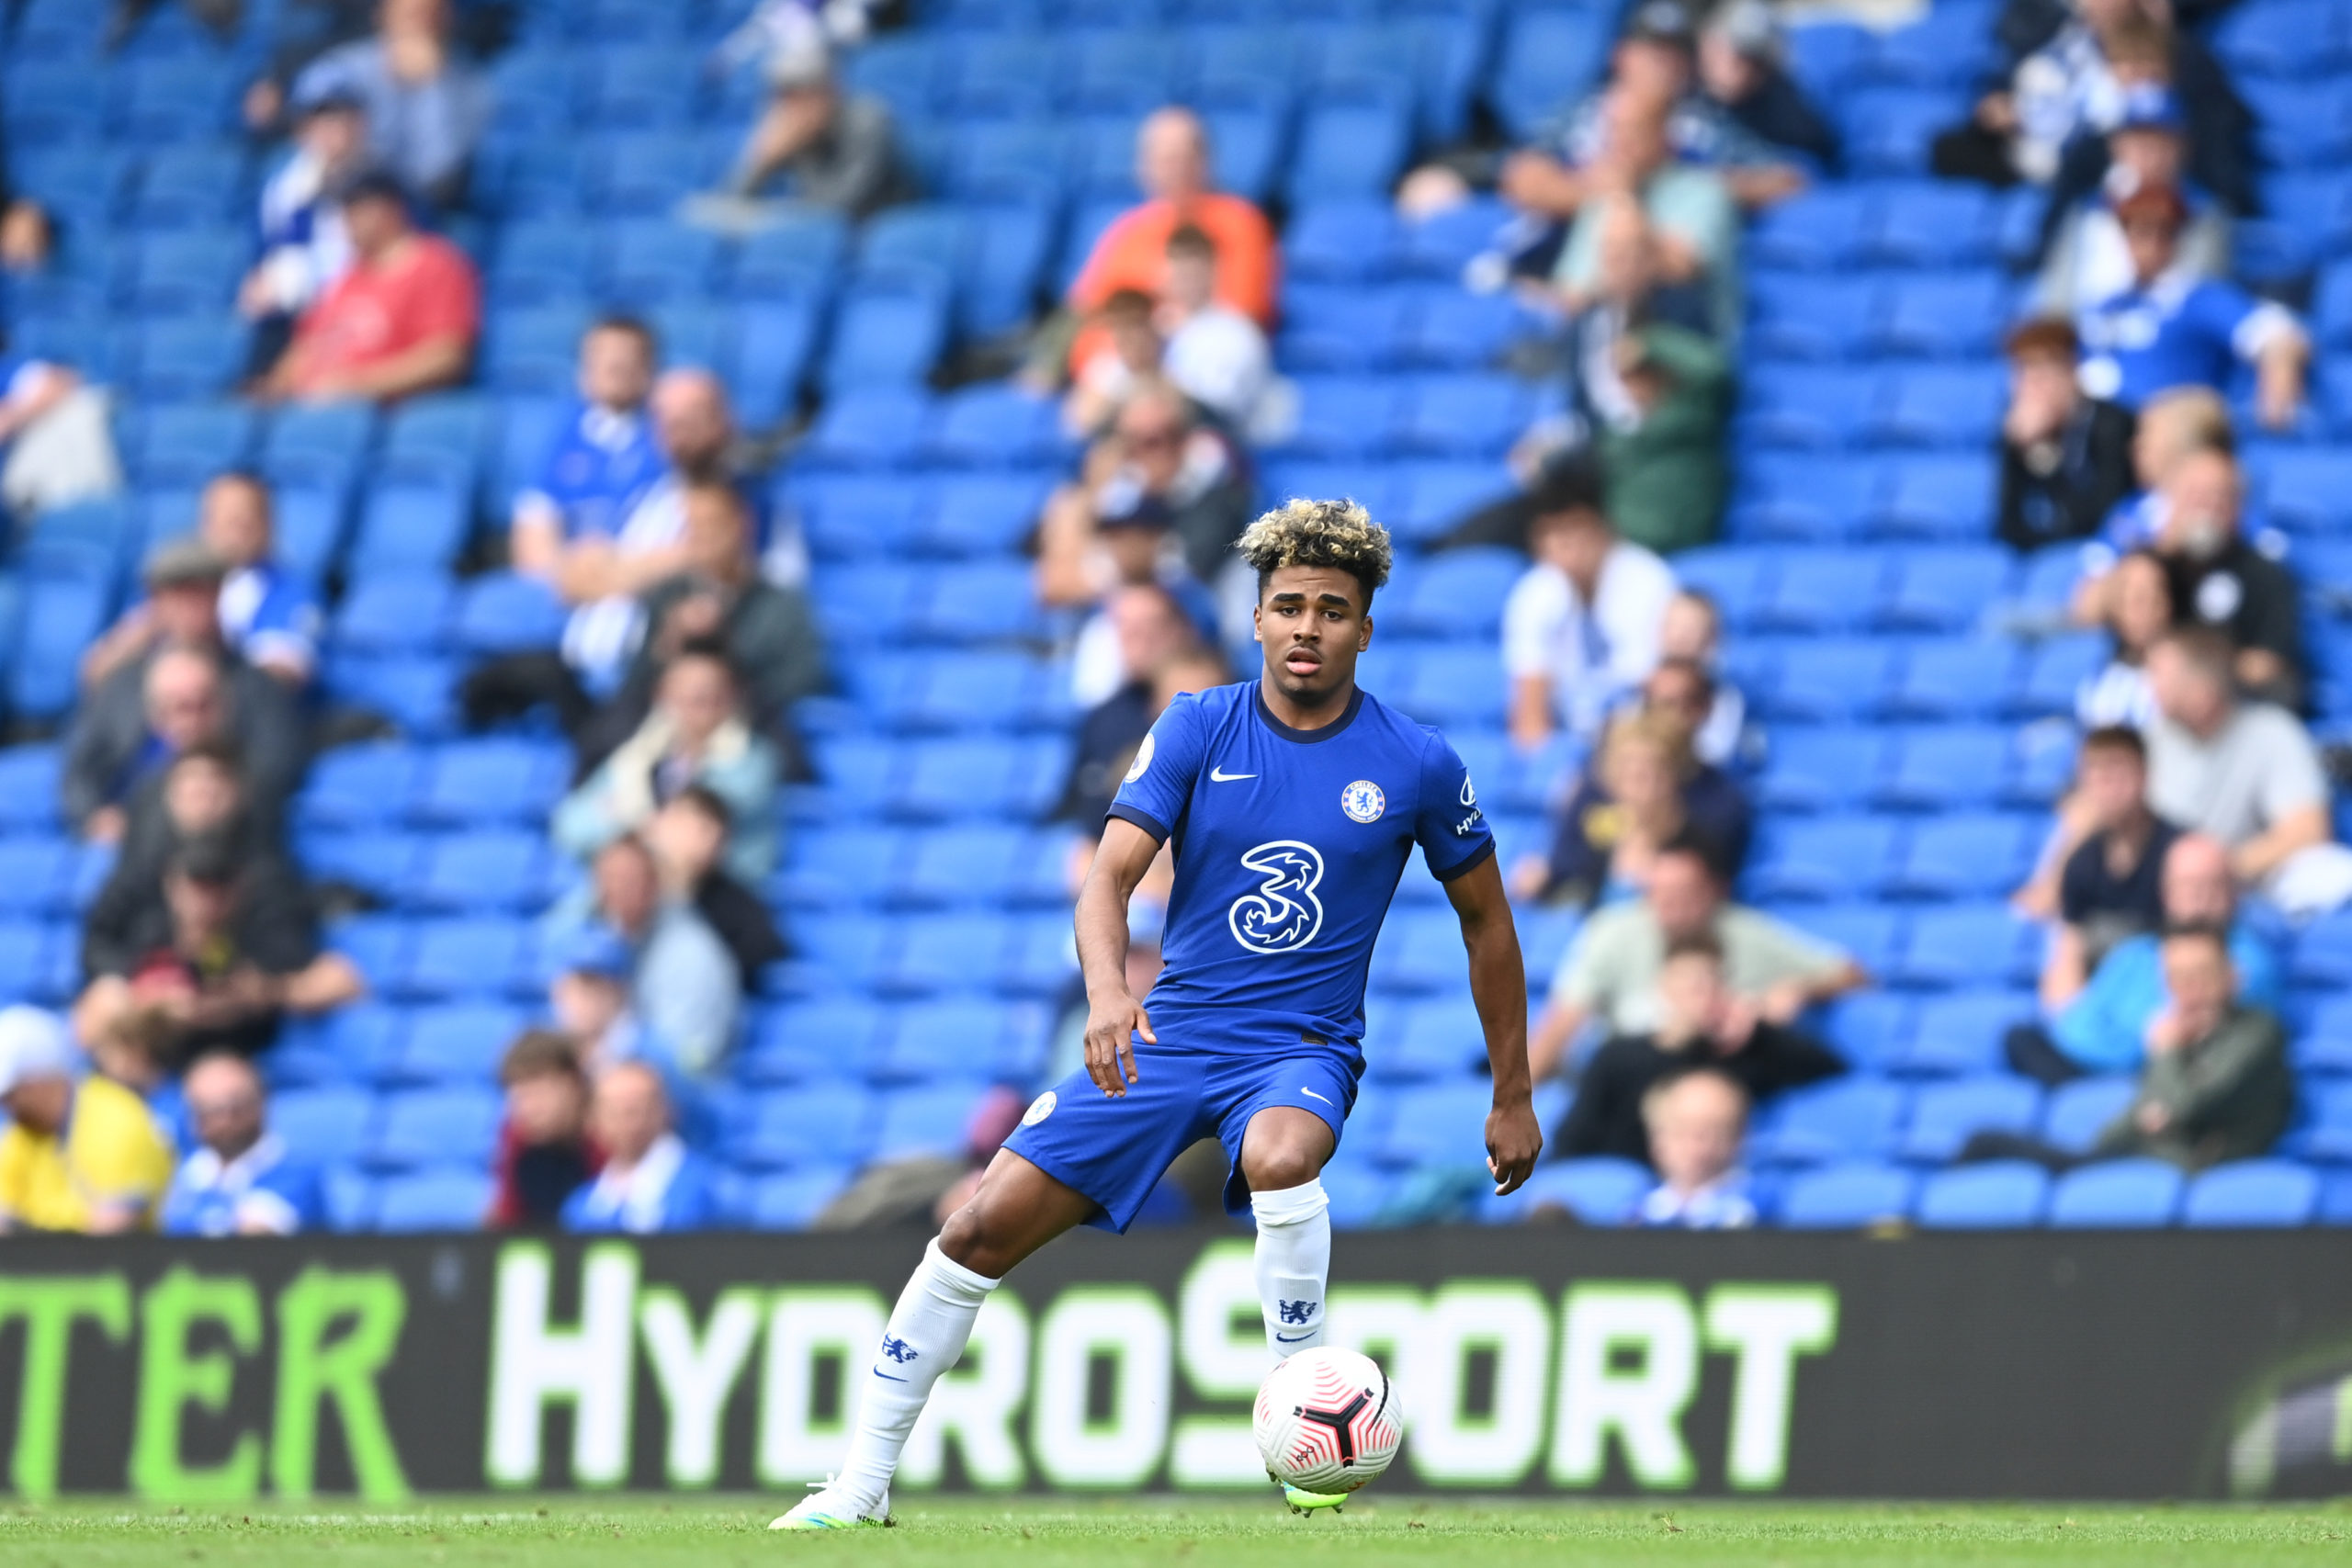 Report: Chelsea consider recalling 19-year-old in January amid Chilwell's injury